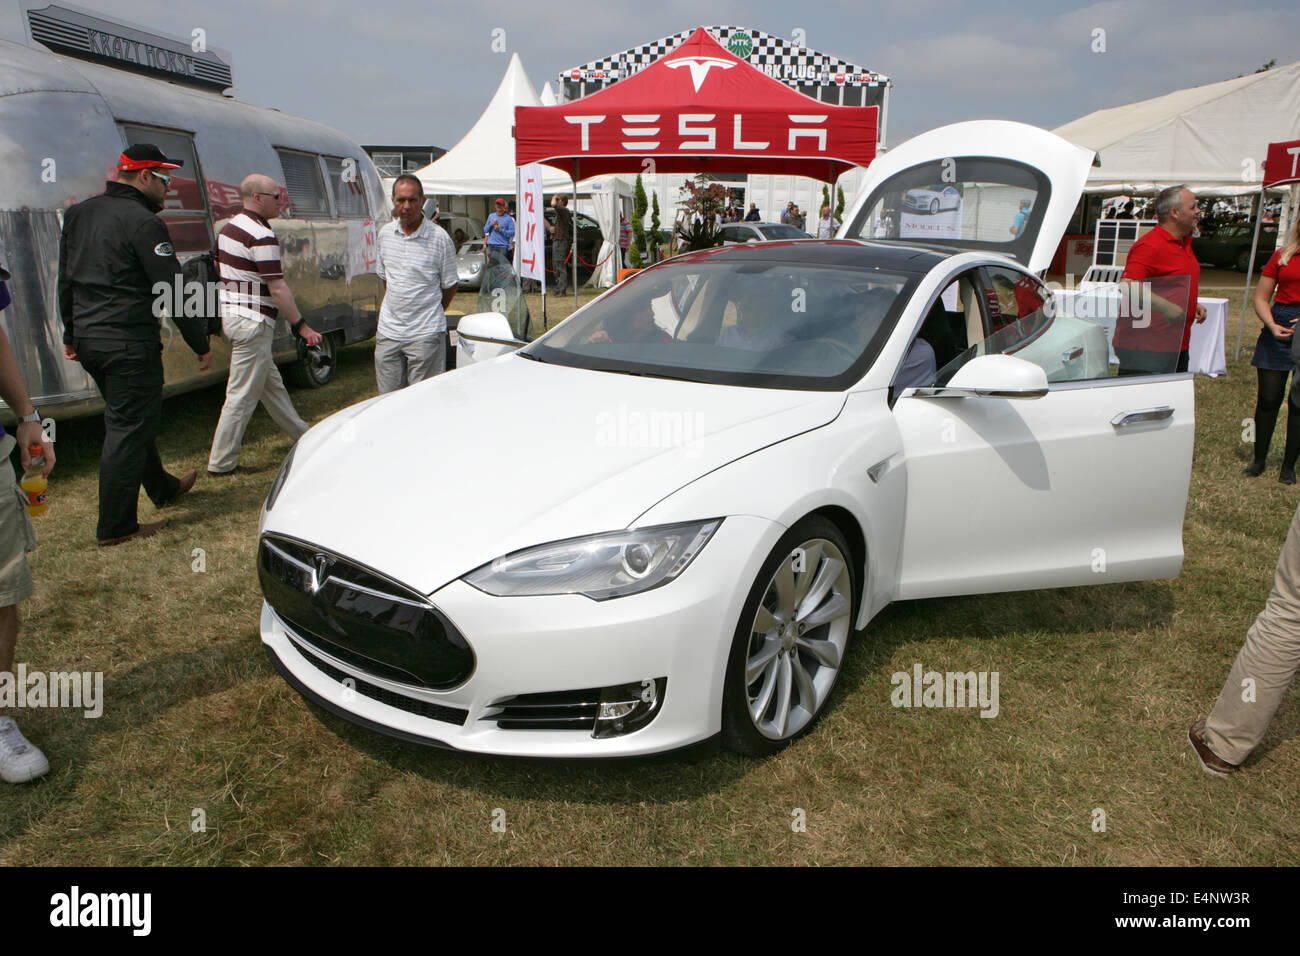 A Tesla electric car draws attention at Goodwood Festival of Speed in 2013. Stock Photo